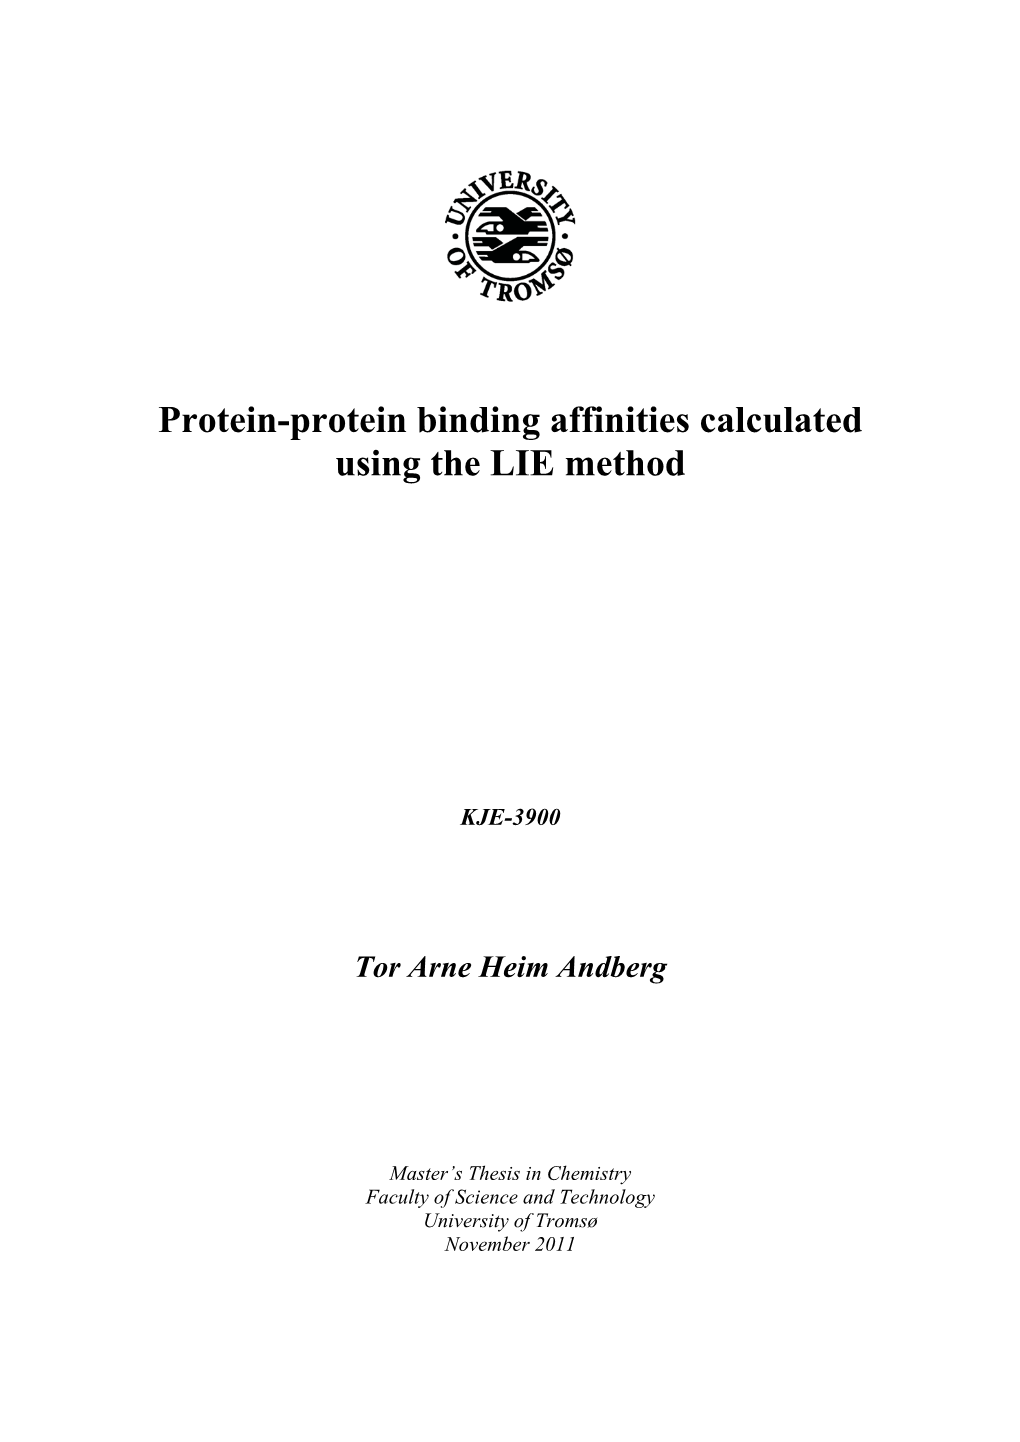 Protein-Protein Binding Affinities Calculated Using the LIE Method